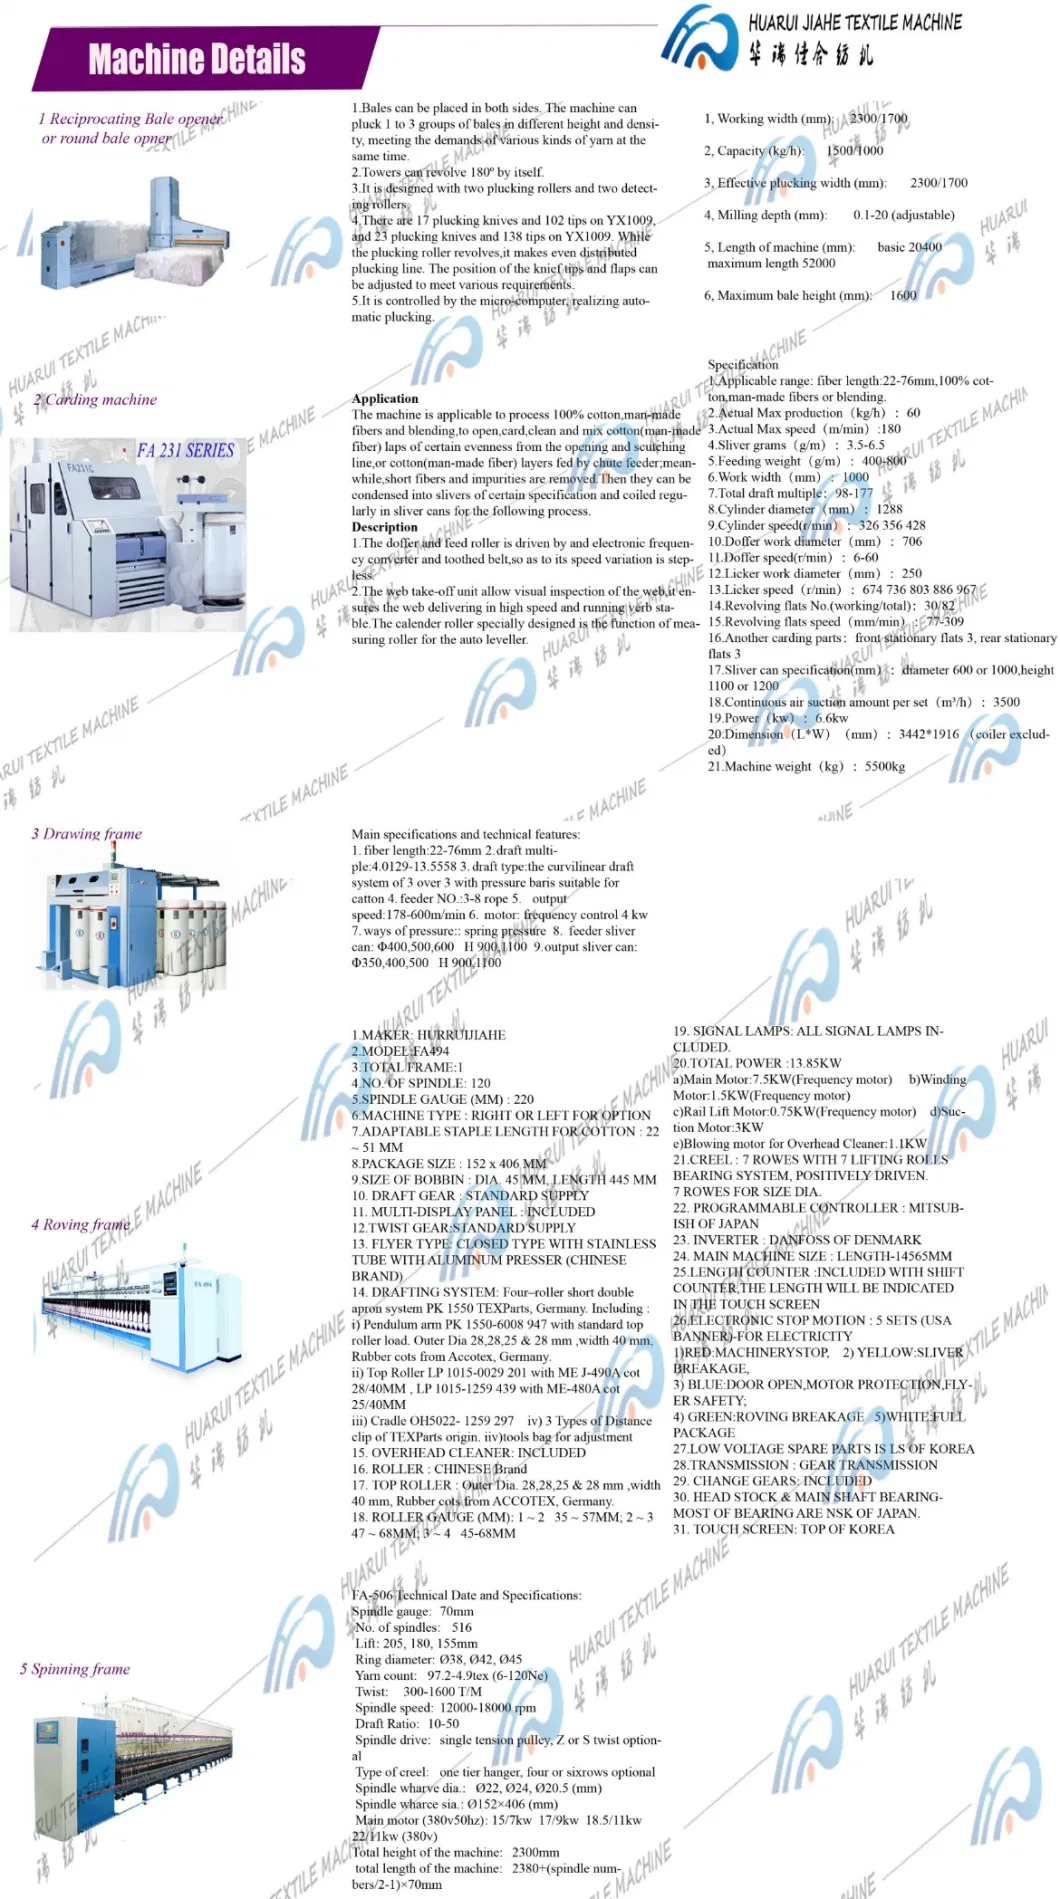 Suitable for Dyeing, Bleaching, Refining Cotton, Spray Hank Yarn Dyeing Machine for Atmospheric Temperature Cotton Wool Spun